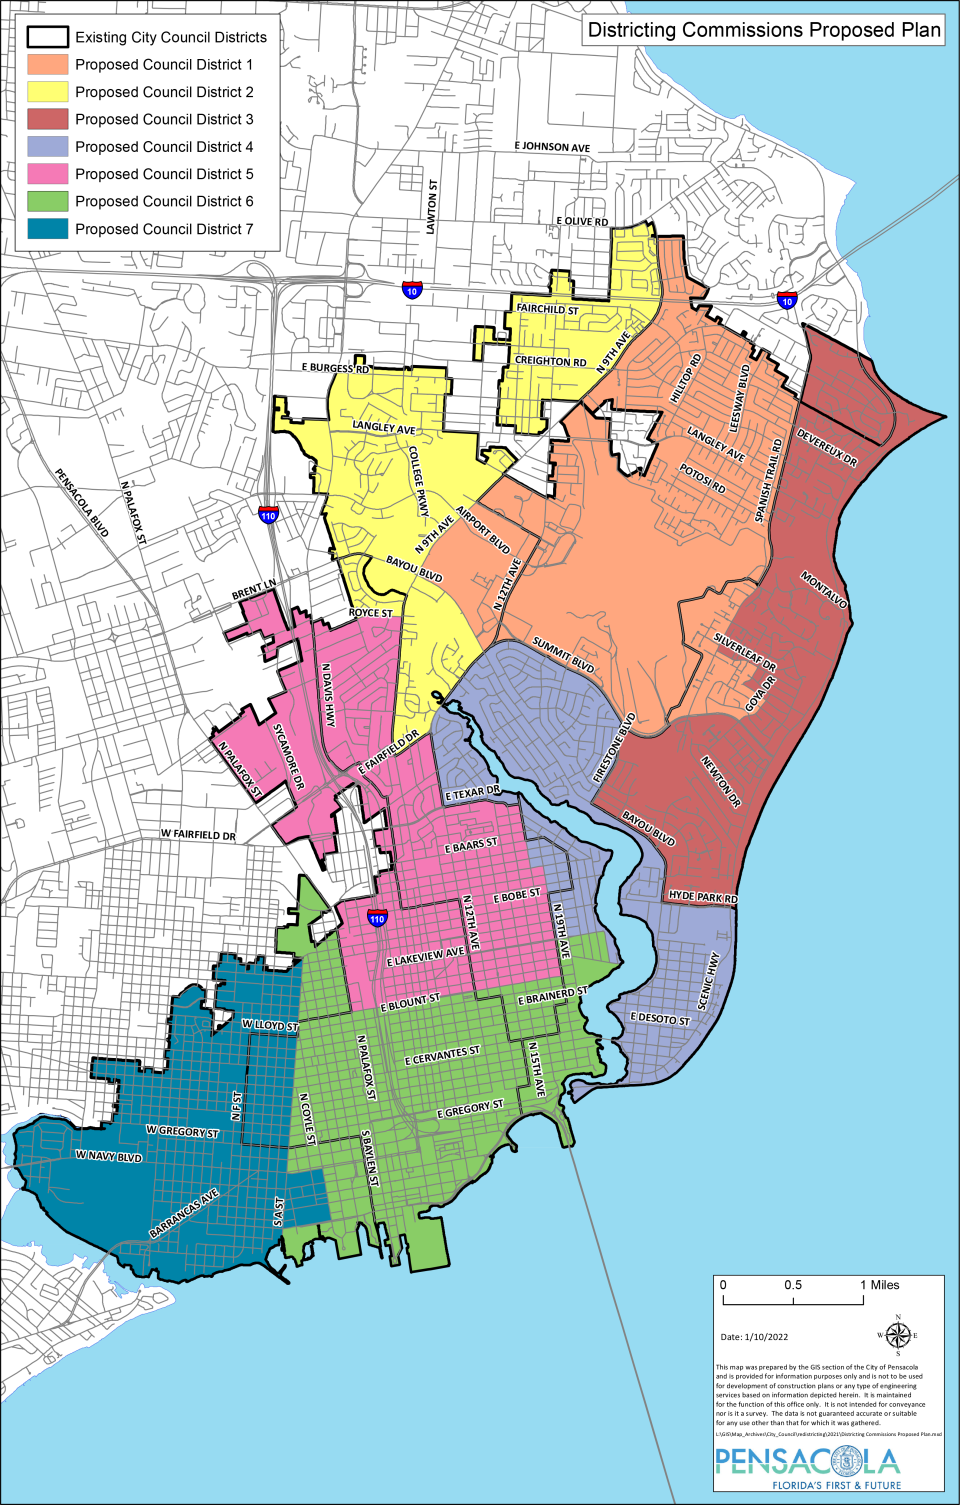 A map shows the new proposed Pensacola City Council districts. The old districts boundaries are shown as black lines.